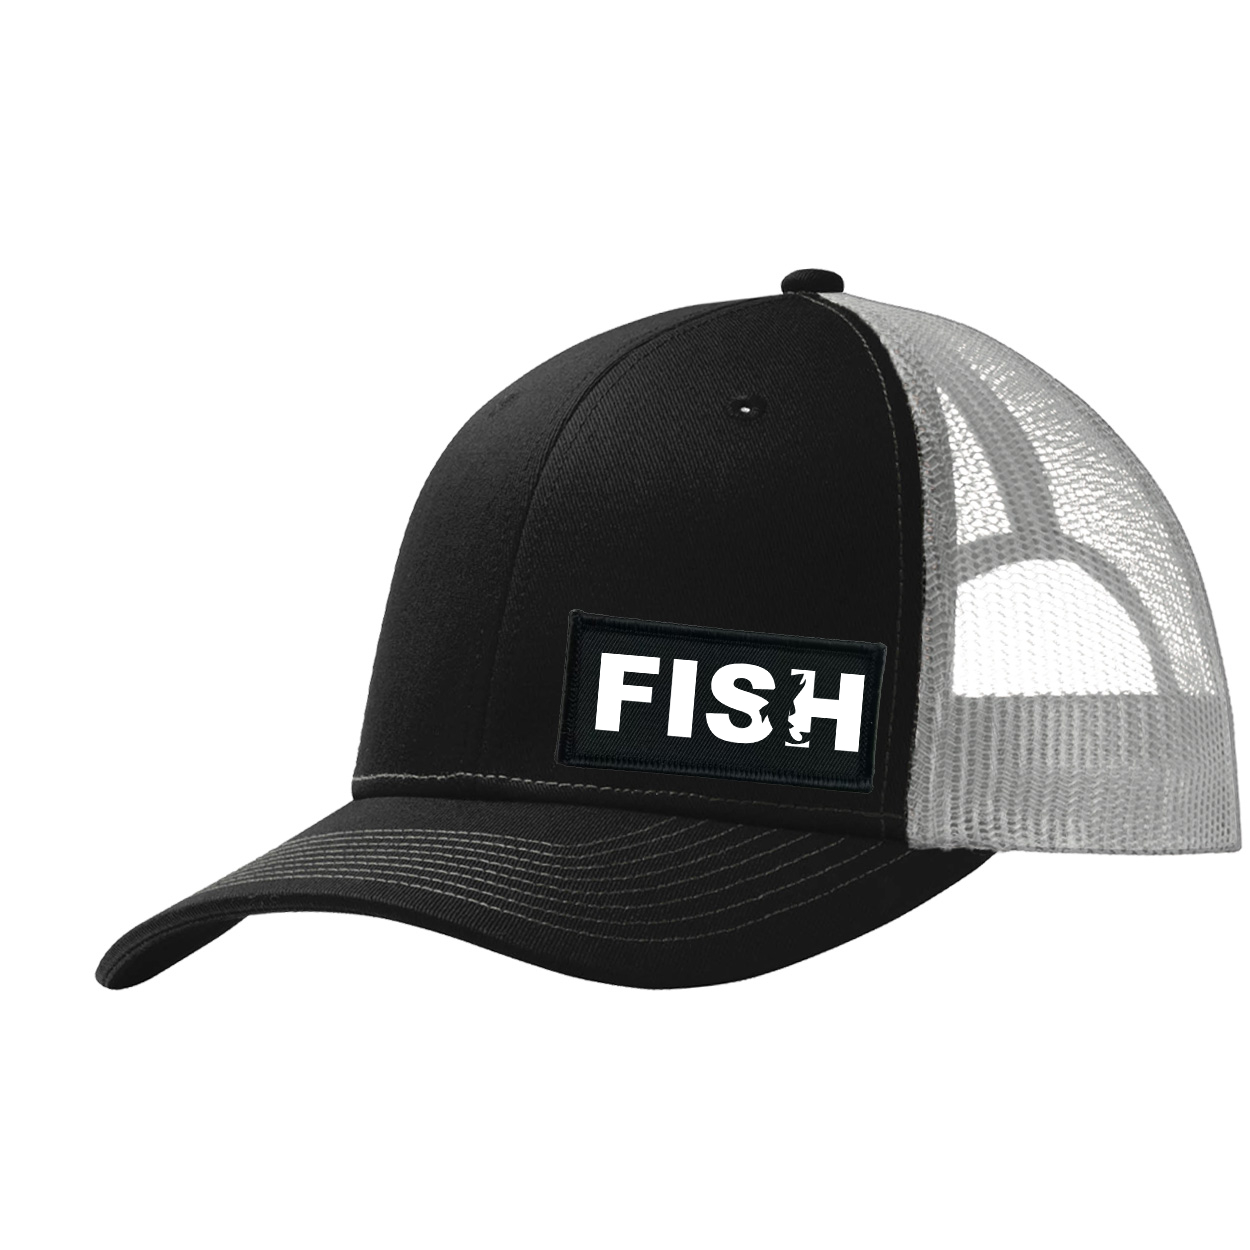 Fish Catch Logo Night Out Woven Patch Snapback Trucker Hat Black/Gray